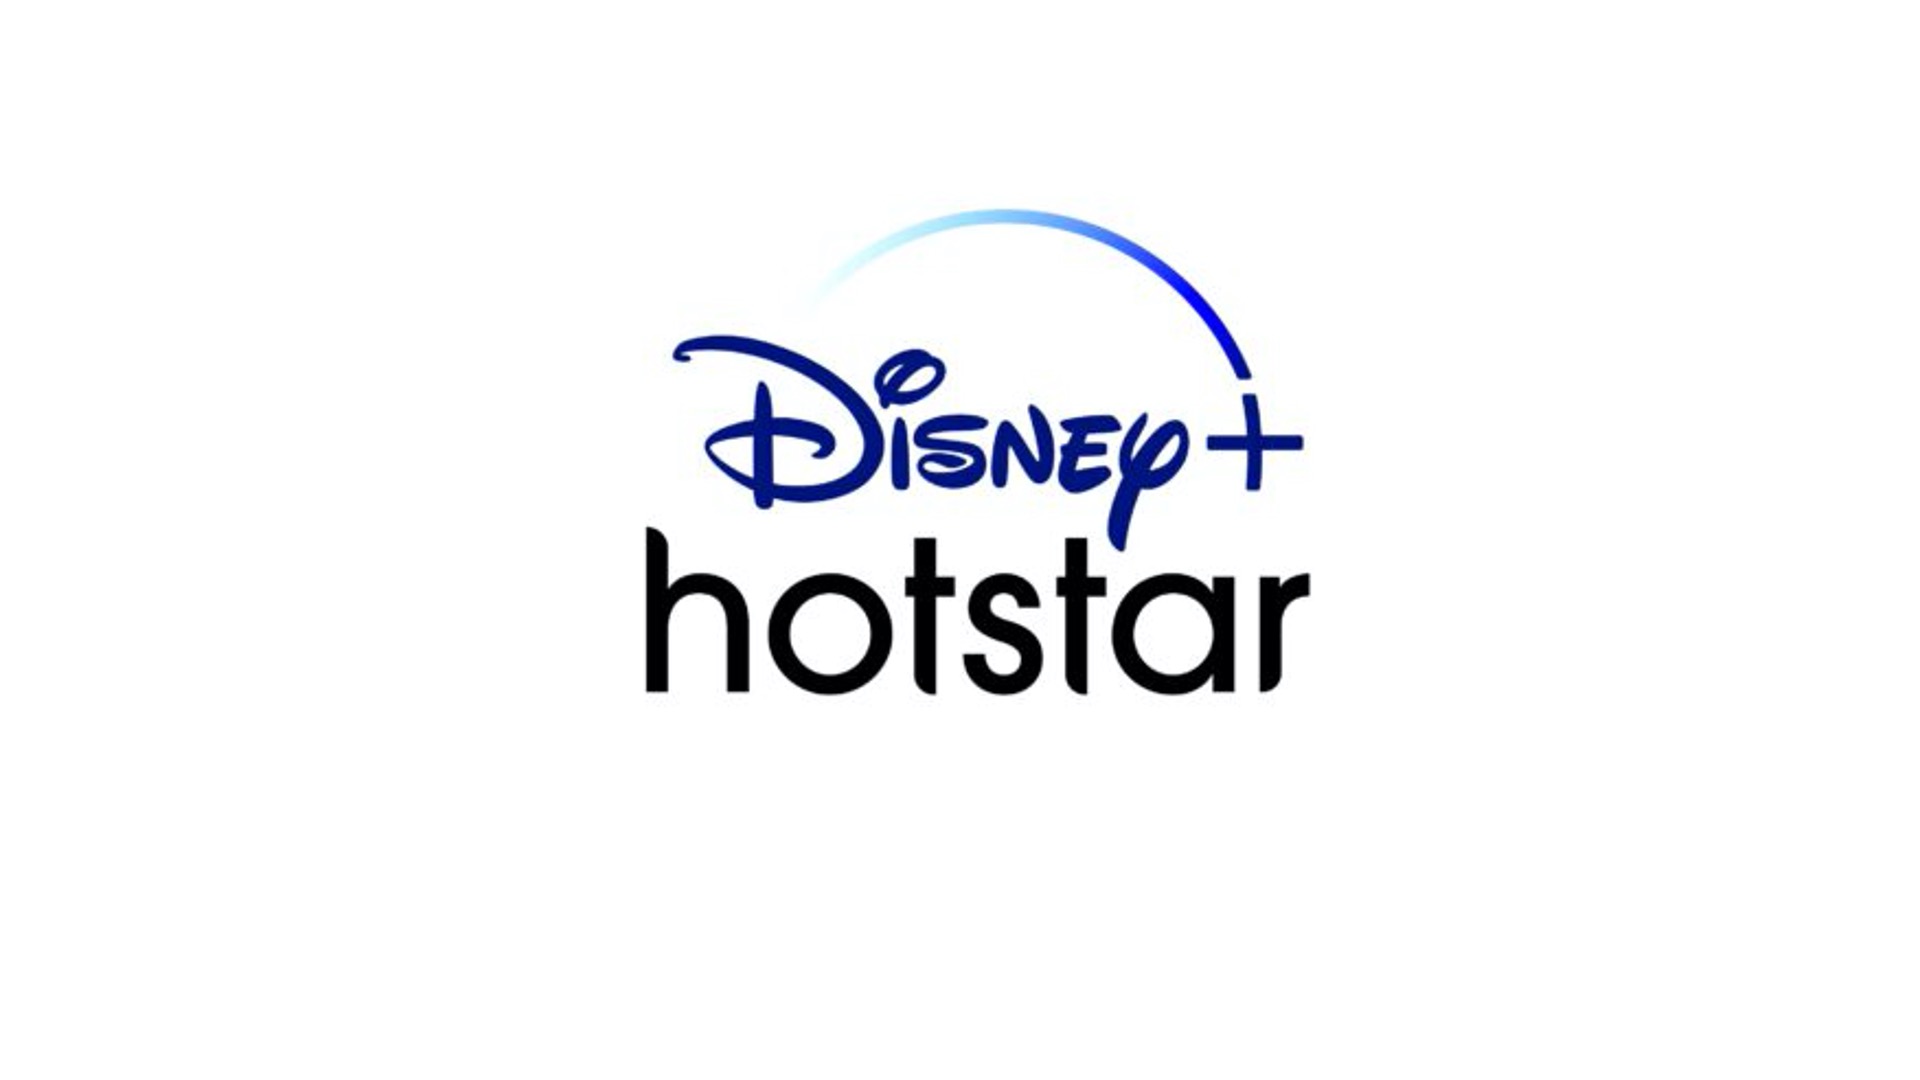 Disney Plus Hotstar Now Official In India With New Subscription